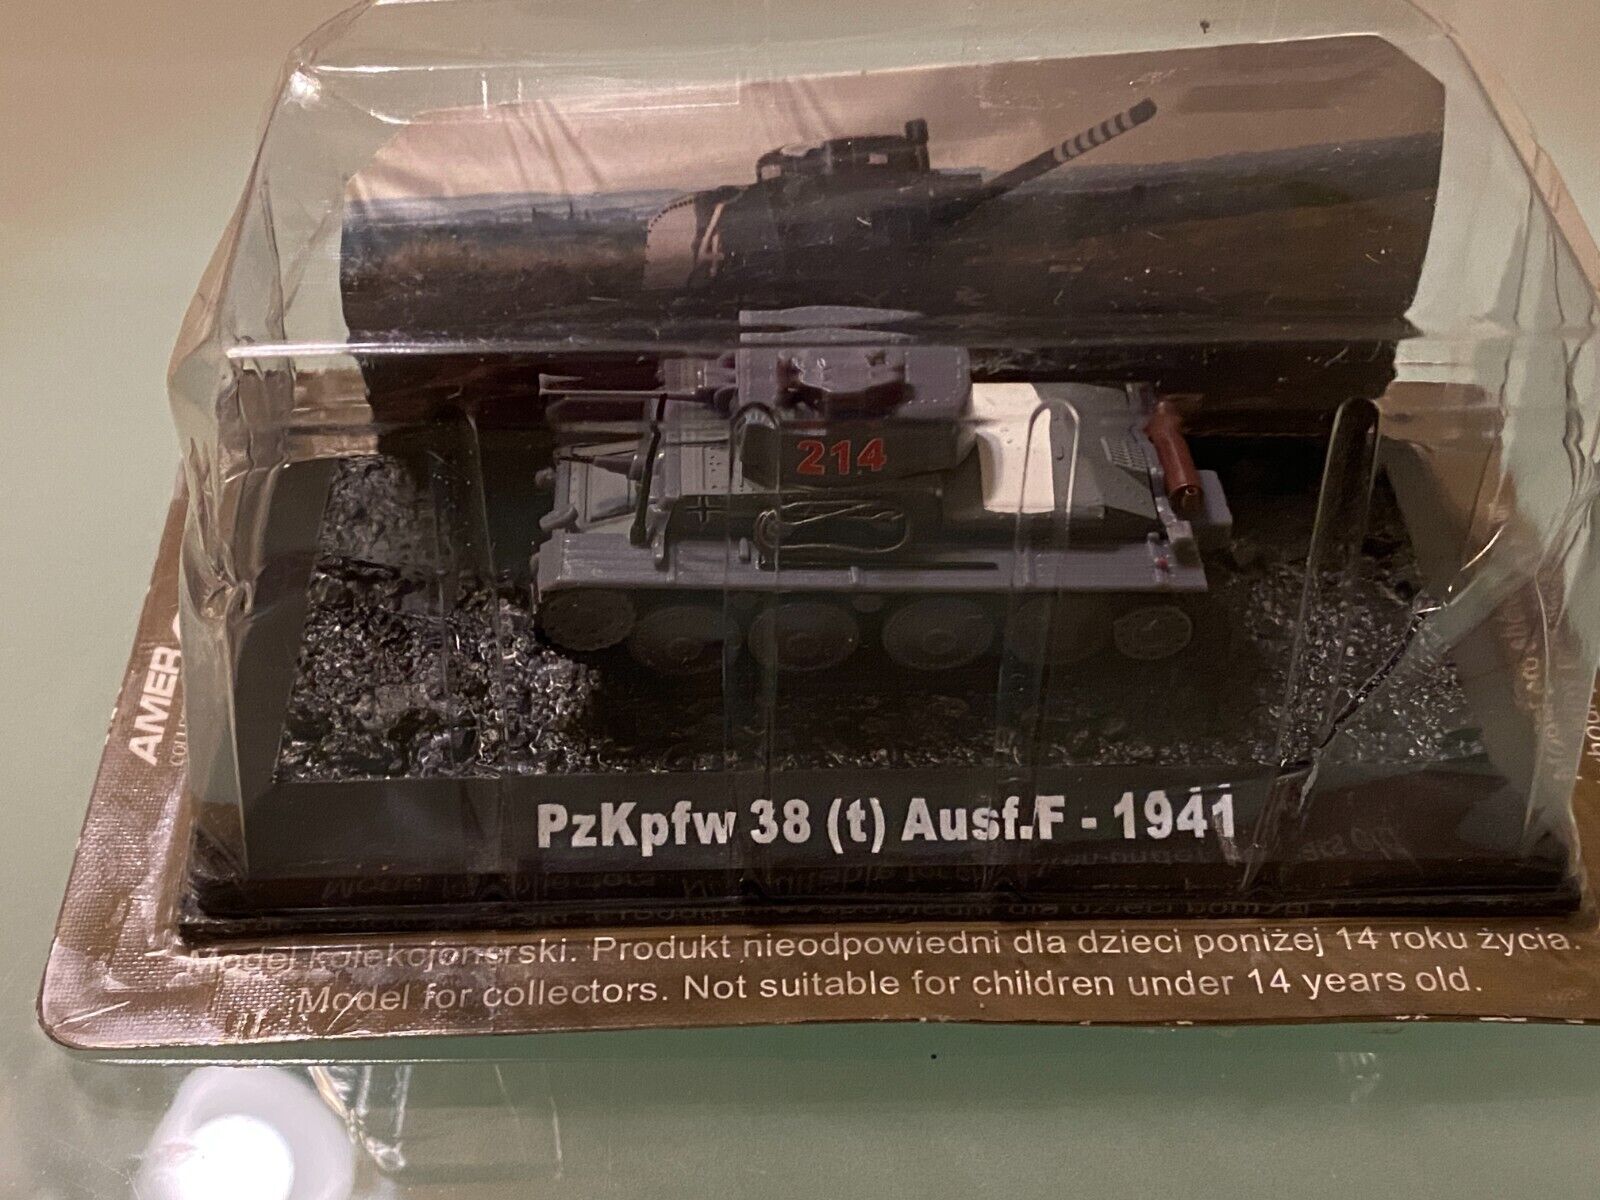 Amer Com PzKPFW 38 (t) Ausf.F  1941 Diecast 1/72 Scale Un-opened In Blister Pak